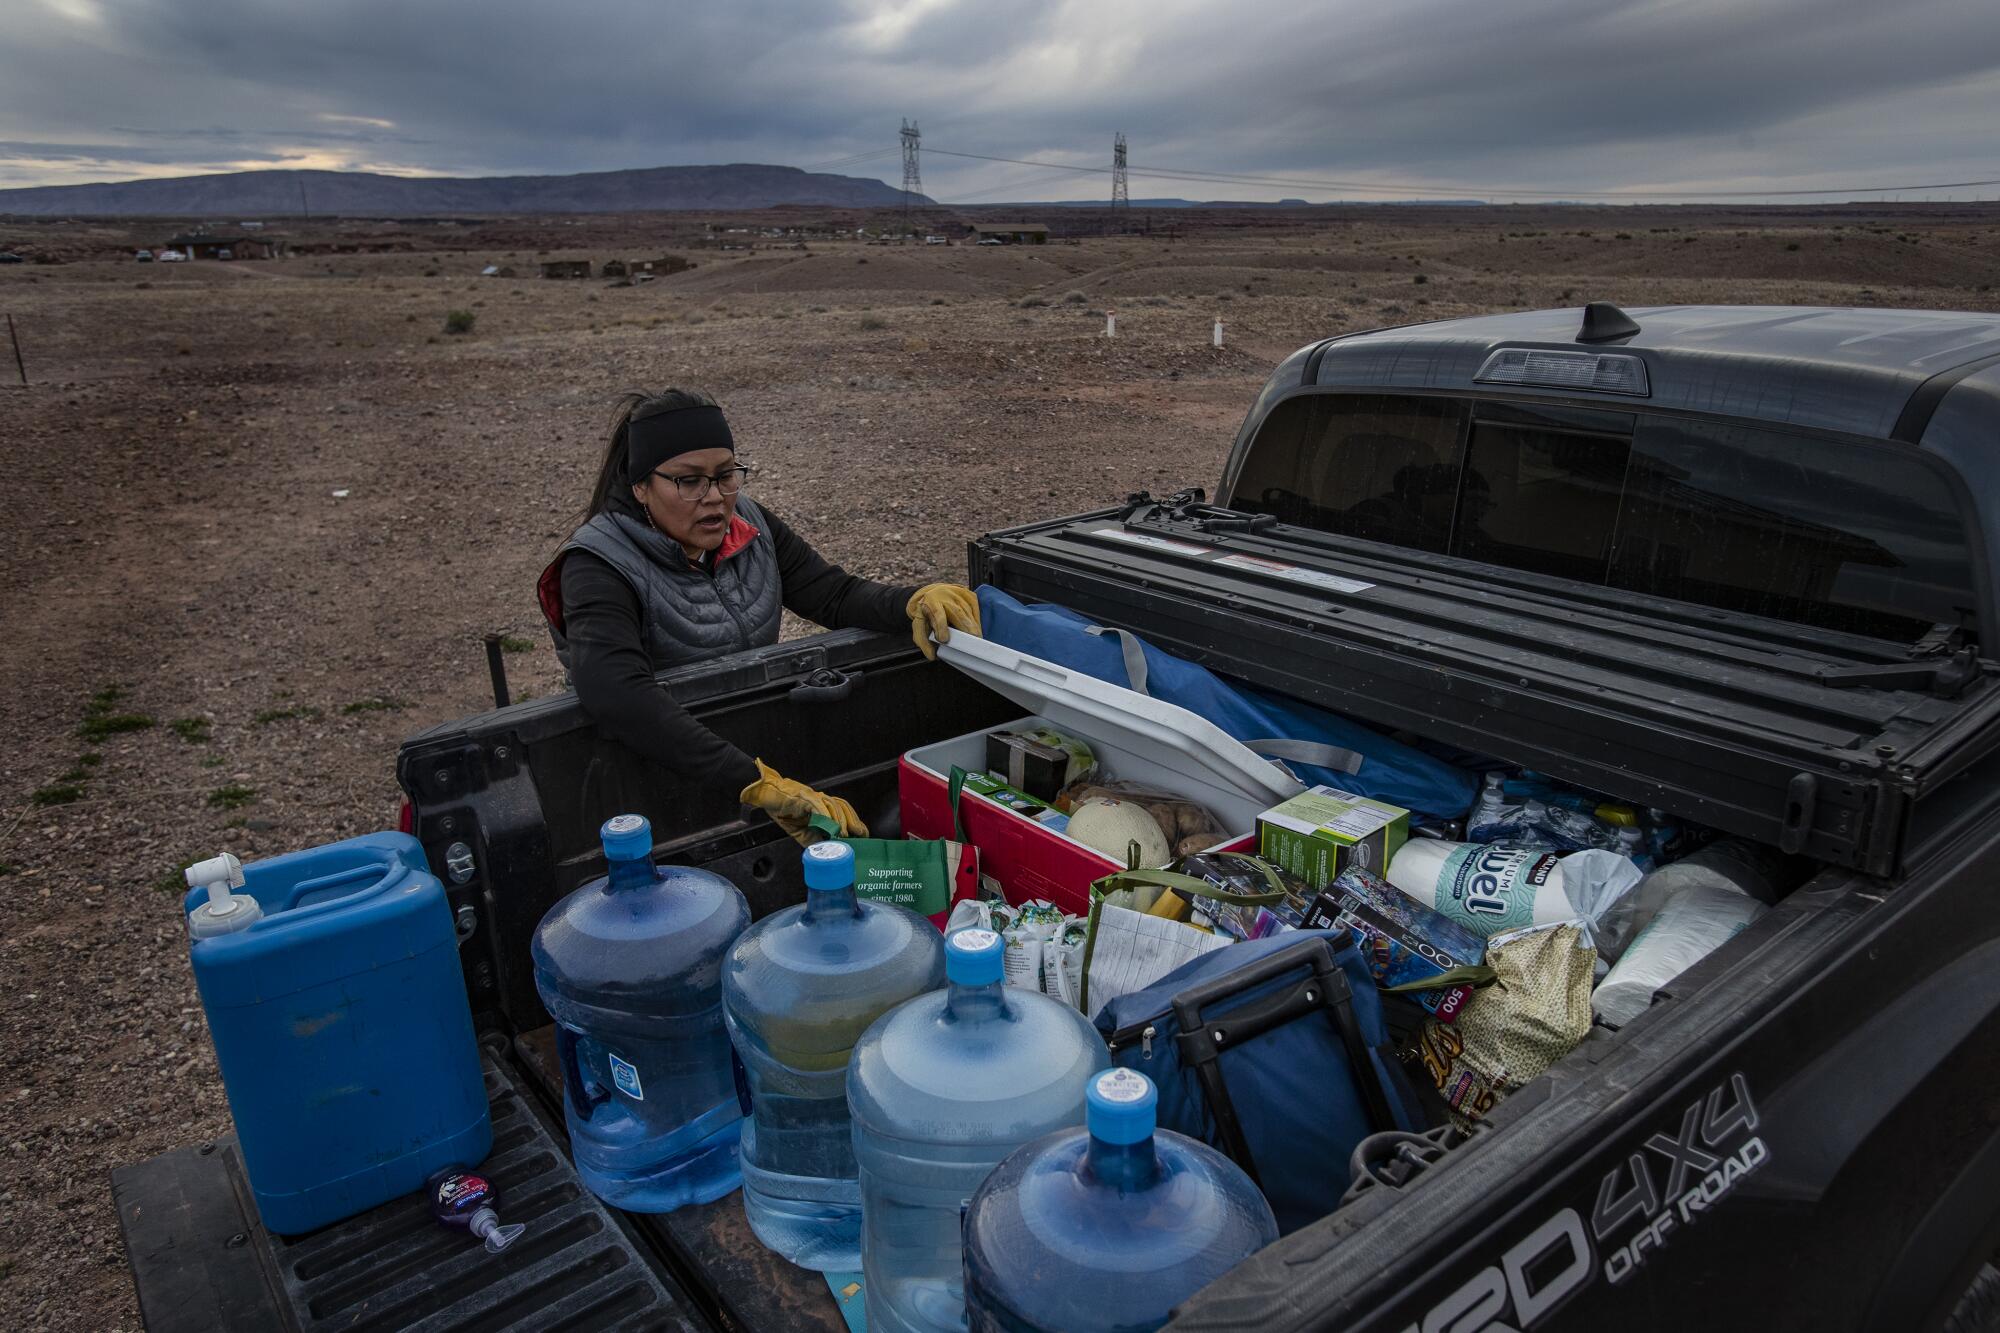 A woman unpacks jugs of water and other supplies from the bed of a pickup truck.